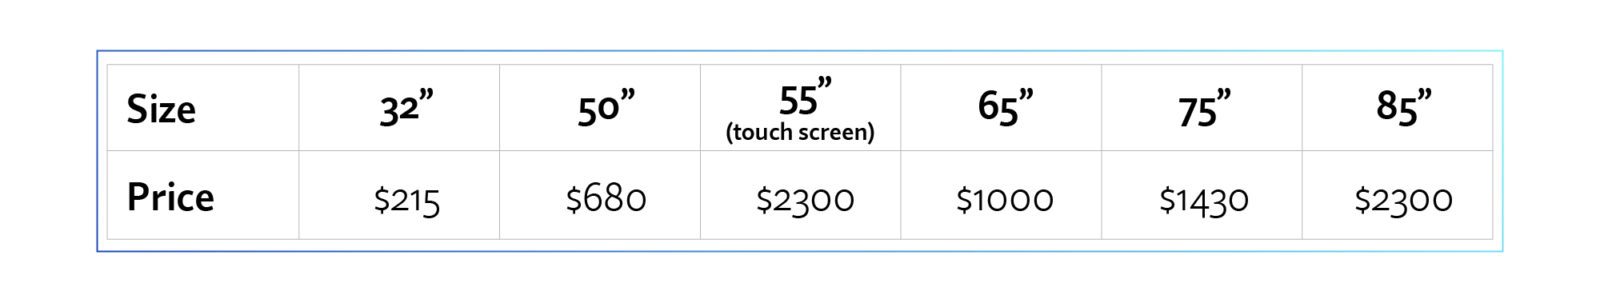 A chart of monitor sizes and corresponding prices.